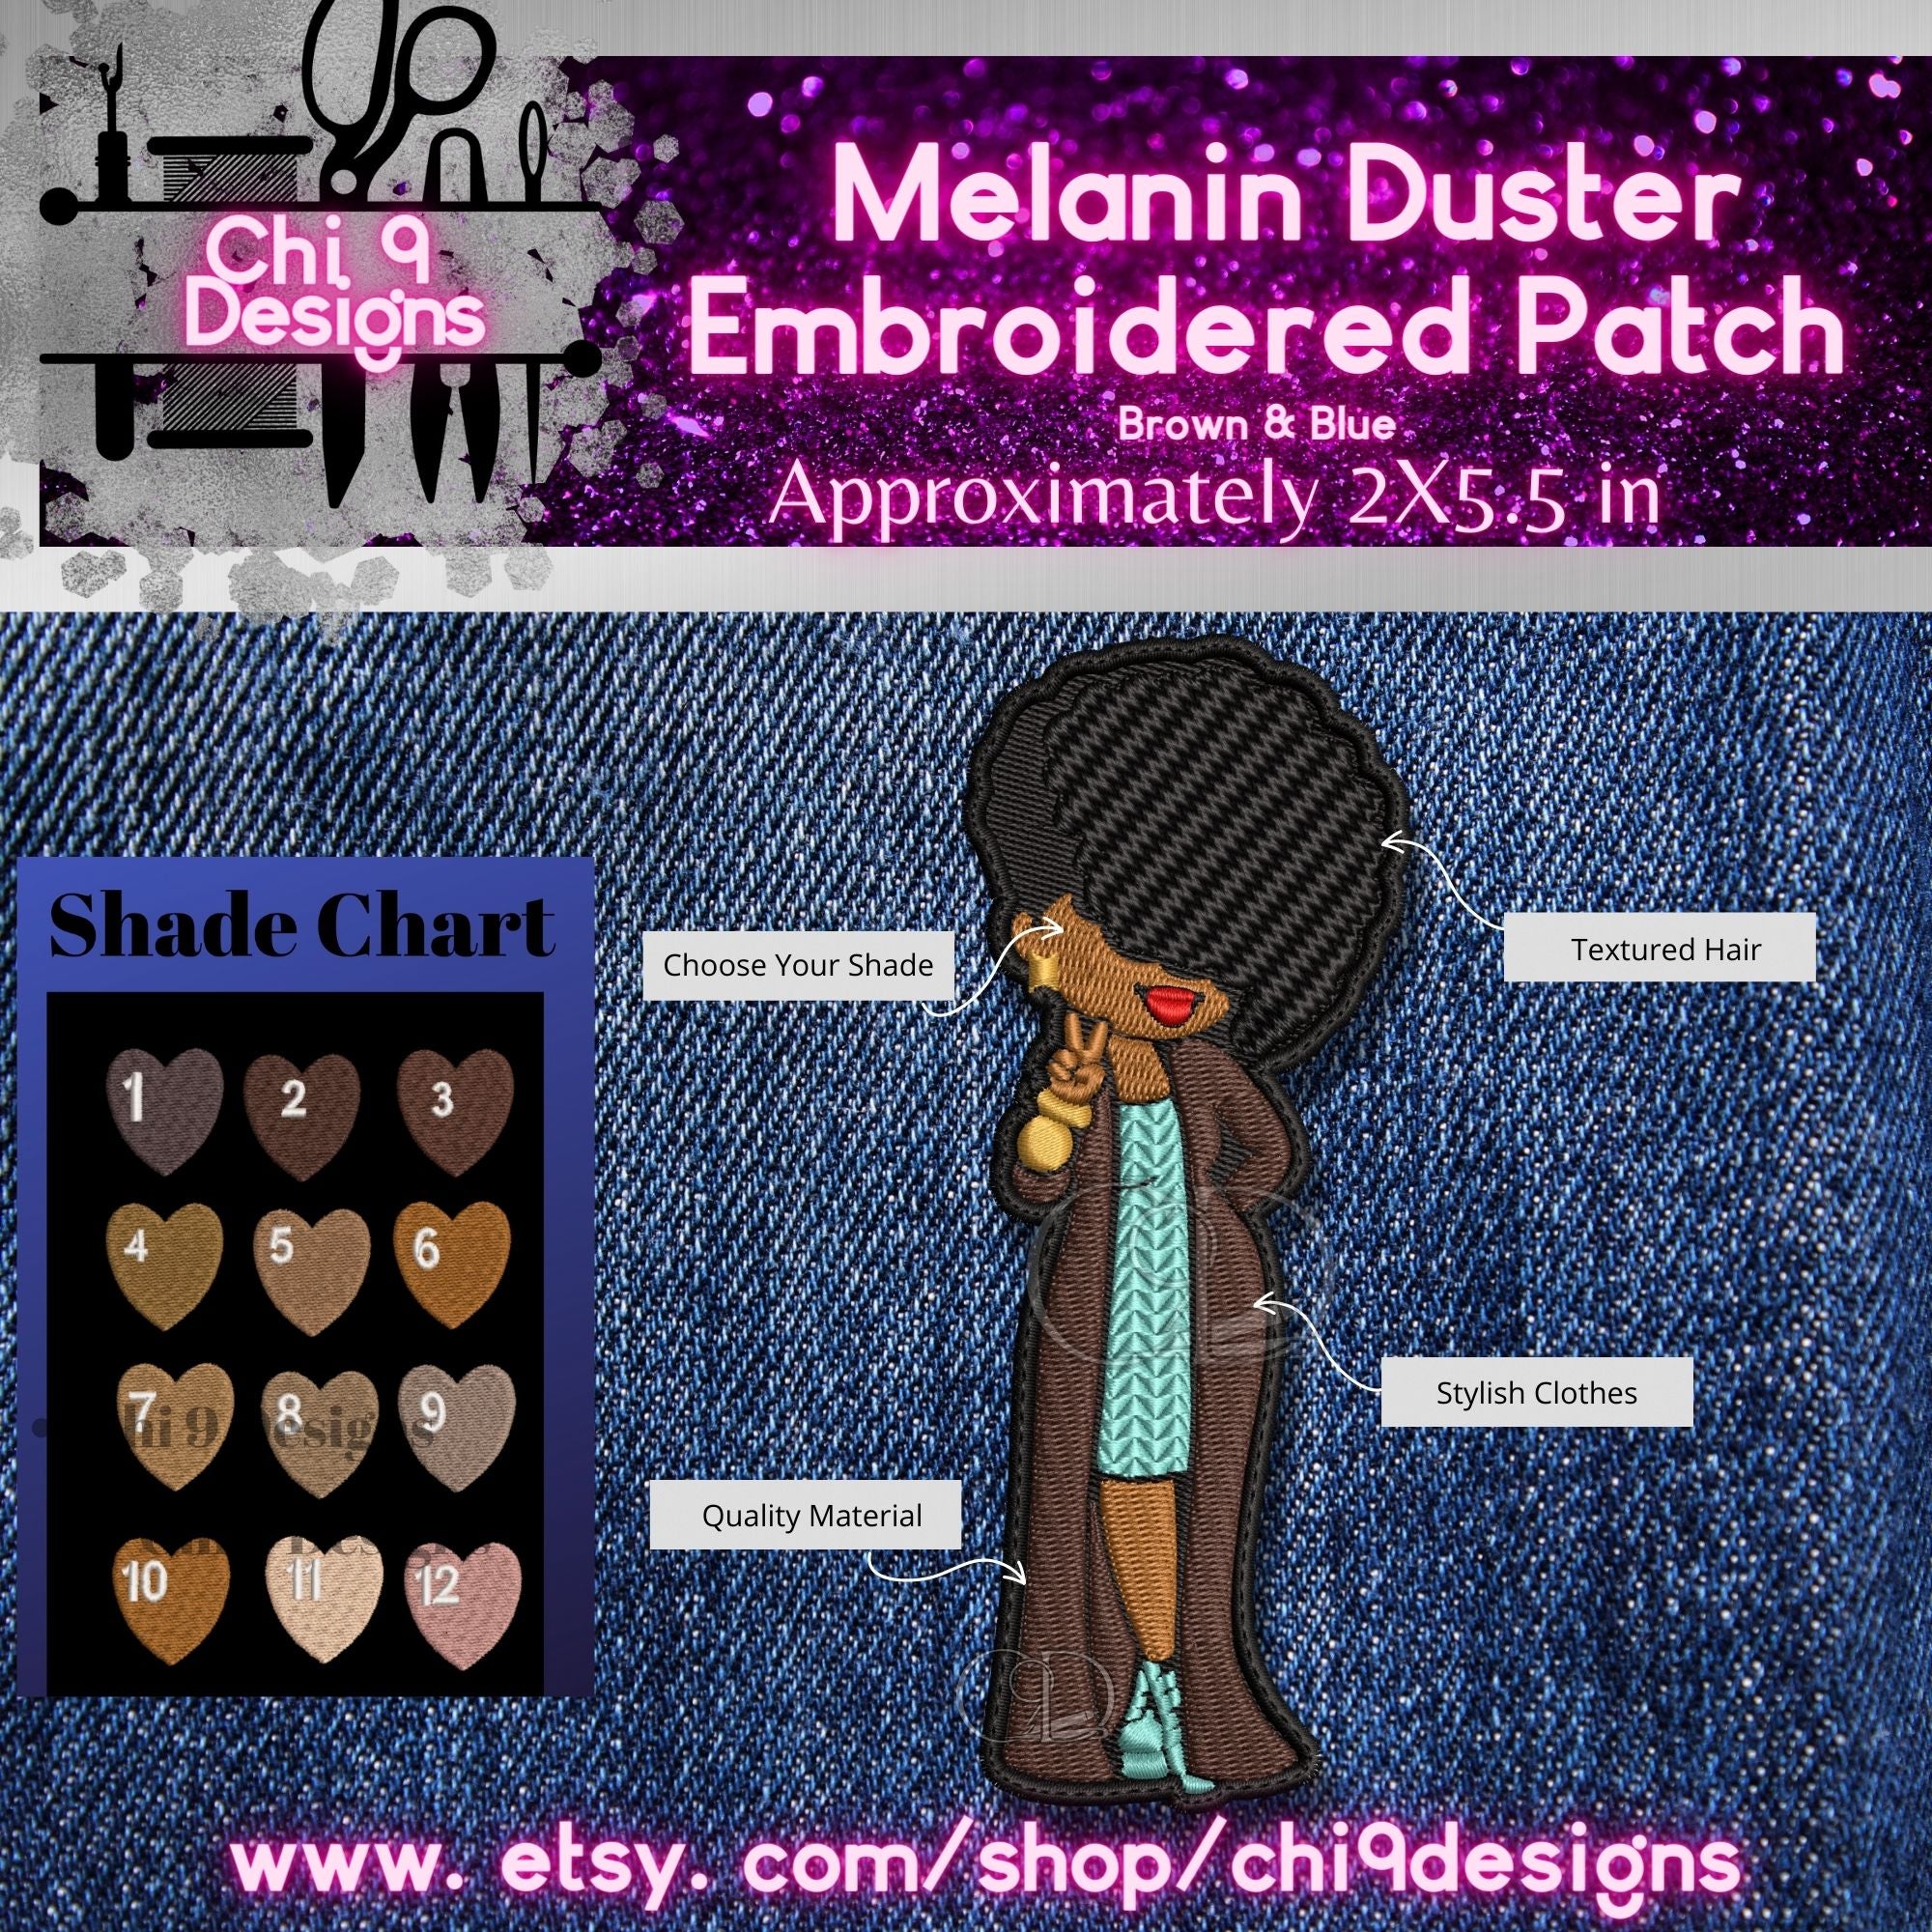 Melanin Duster Embroidered Patch with Brown and Blue Clothes